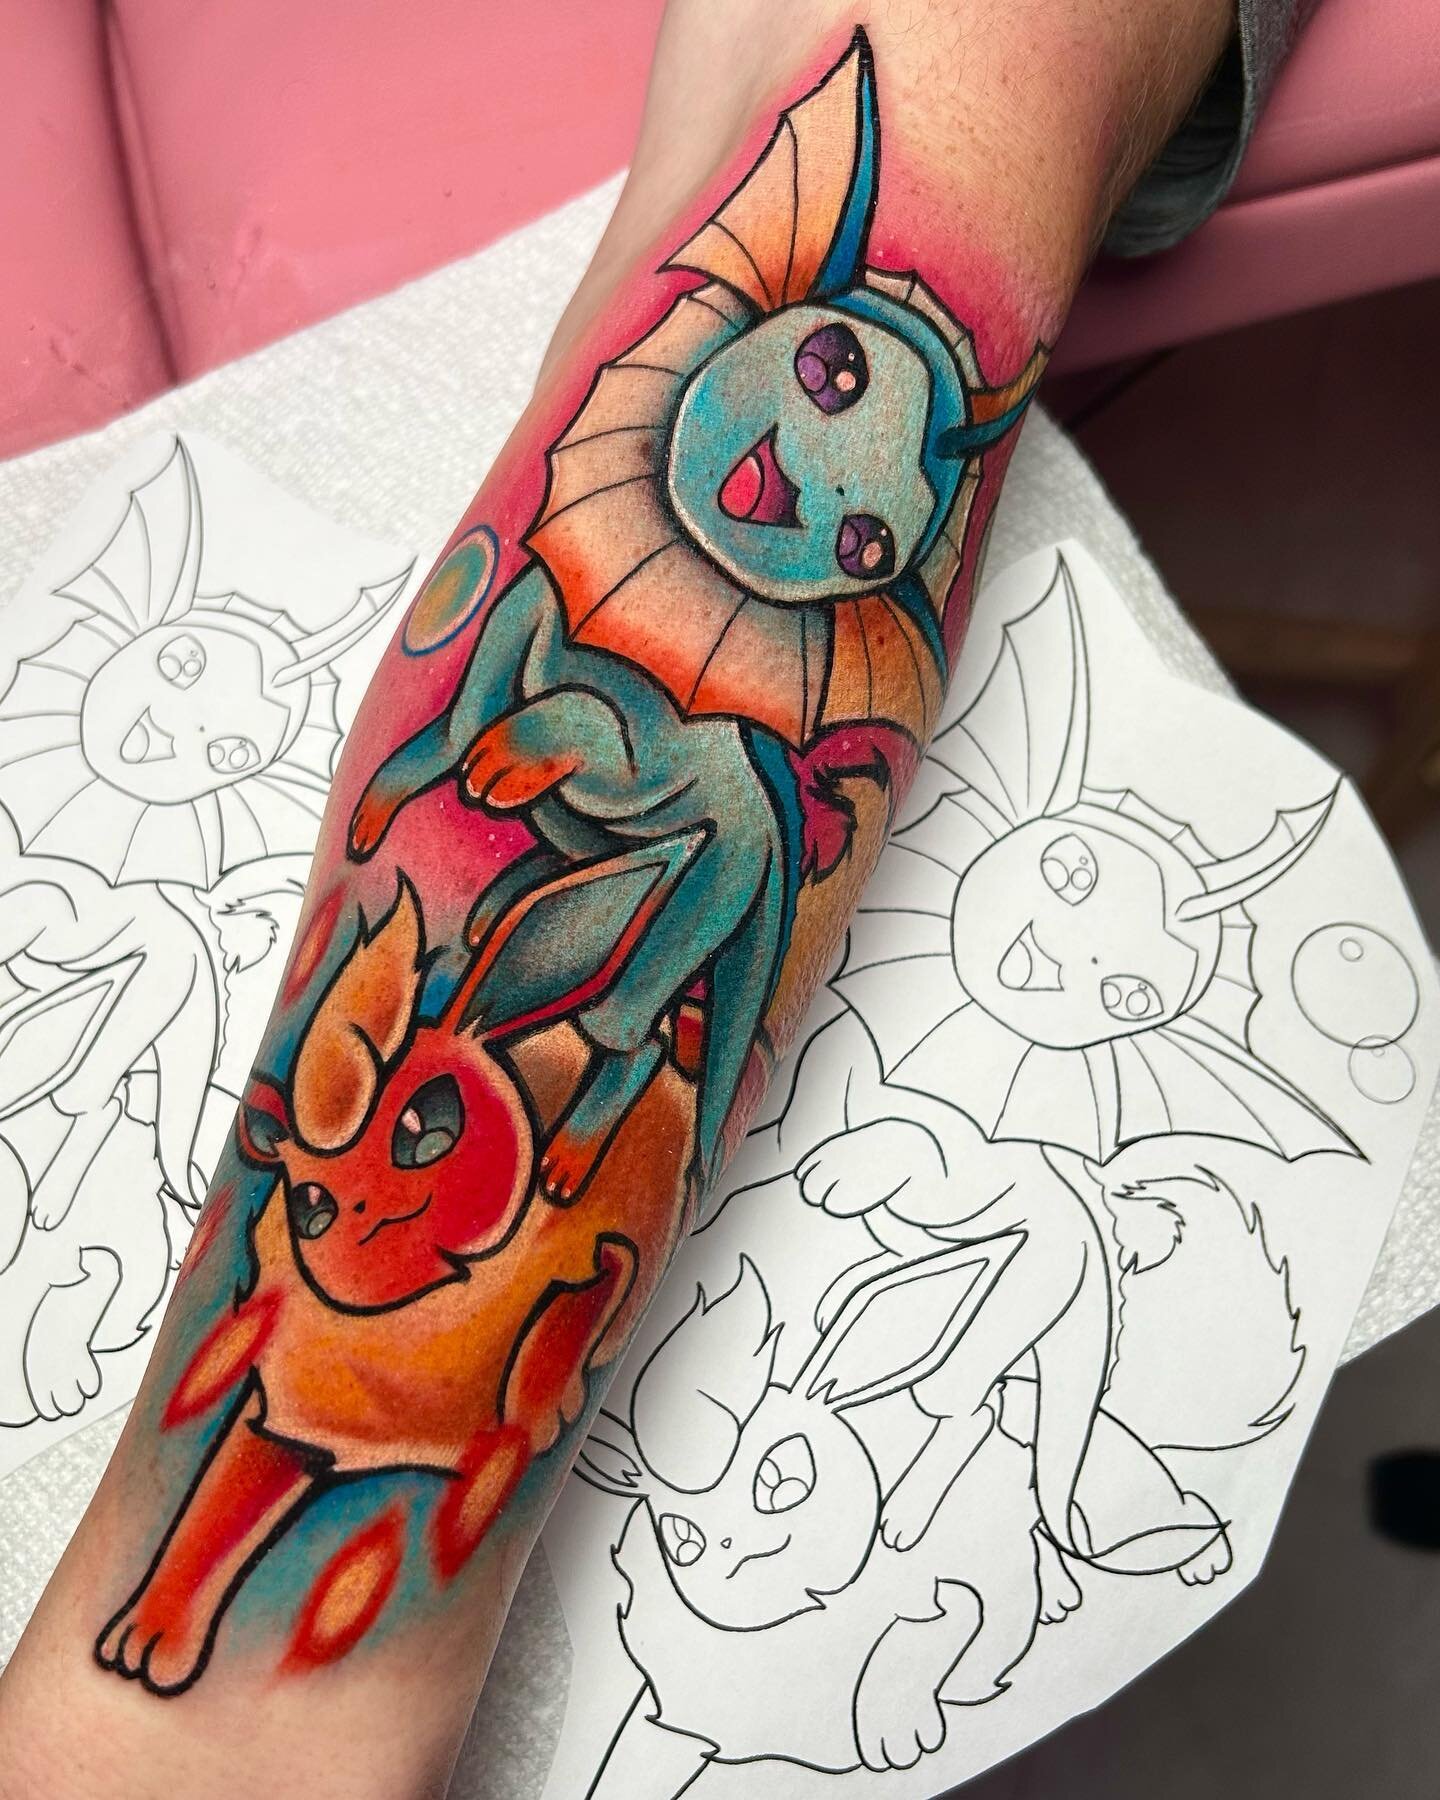 had so much fun starting this eeveelution sleeve! can&rsquo;t wait to add to it!🔥💦

 #tattoo #tattooartist #femaletattooartist #atl #atlantatattoo #atlantatattooartist
#art #kawaii #kawaiitattoo #cute #cutetattoo #anime #animetattoo #neotrad #neotr